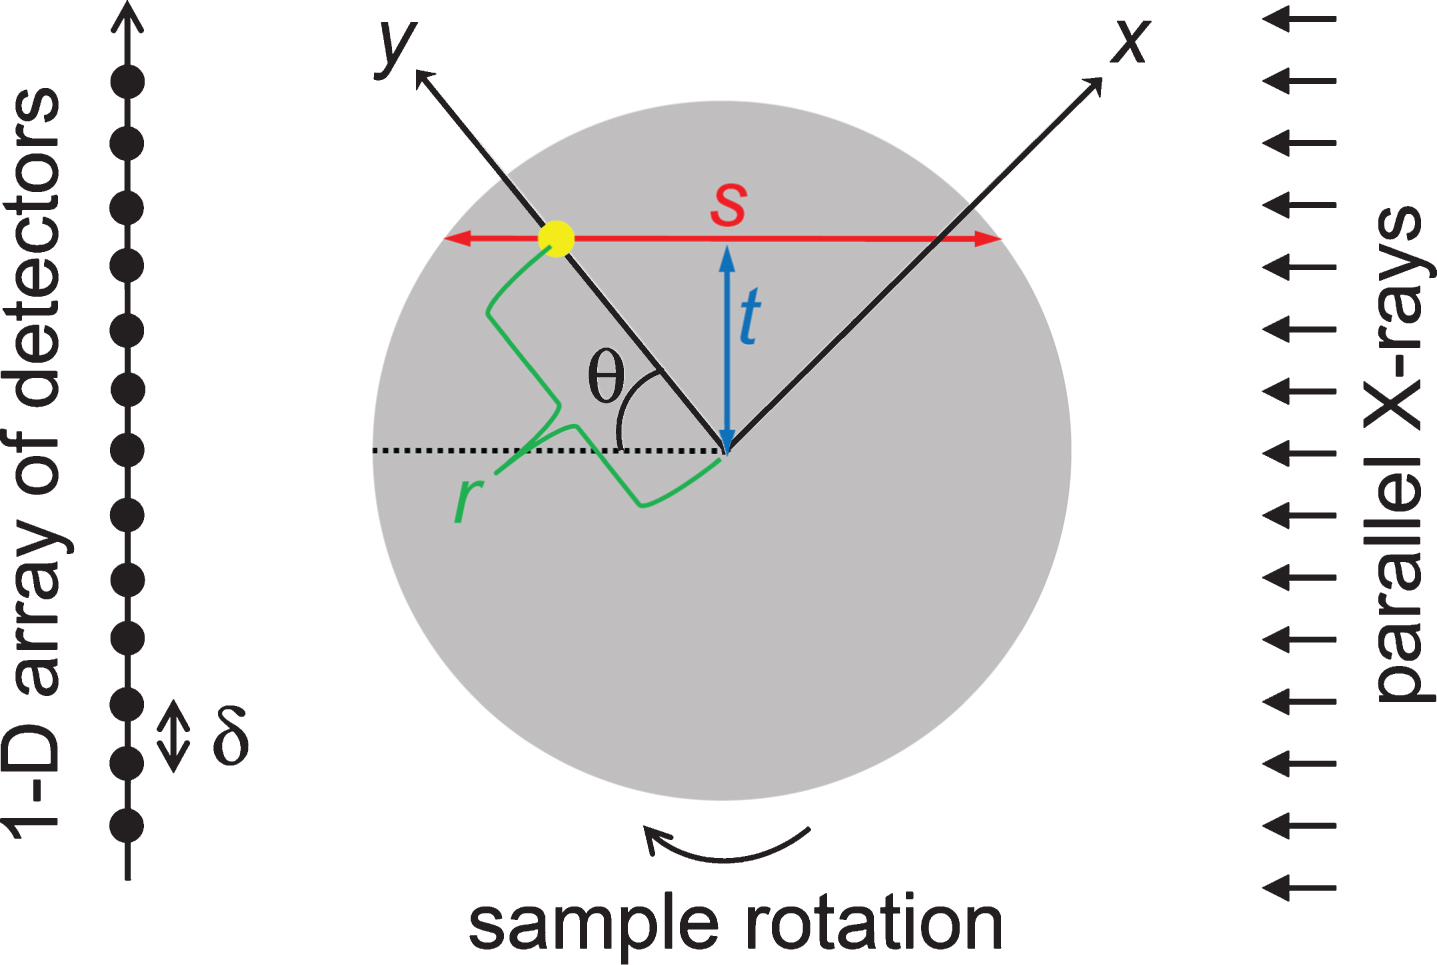 The configuration of a cylindrical sample (in grey) with radius R in an imaging system with a detector gap δ. The polar coordinates of an arbitrary point (the yellow dot) within the sample are (r, θ). Another coordinate system (an x - y system) is rotated by 180 degree during the X-ray emissions. The sample center coincides with the center of rotation.